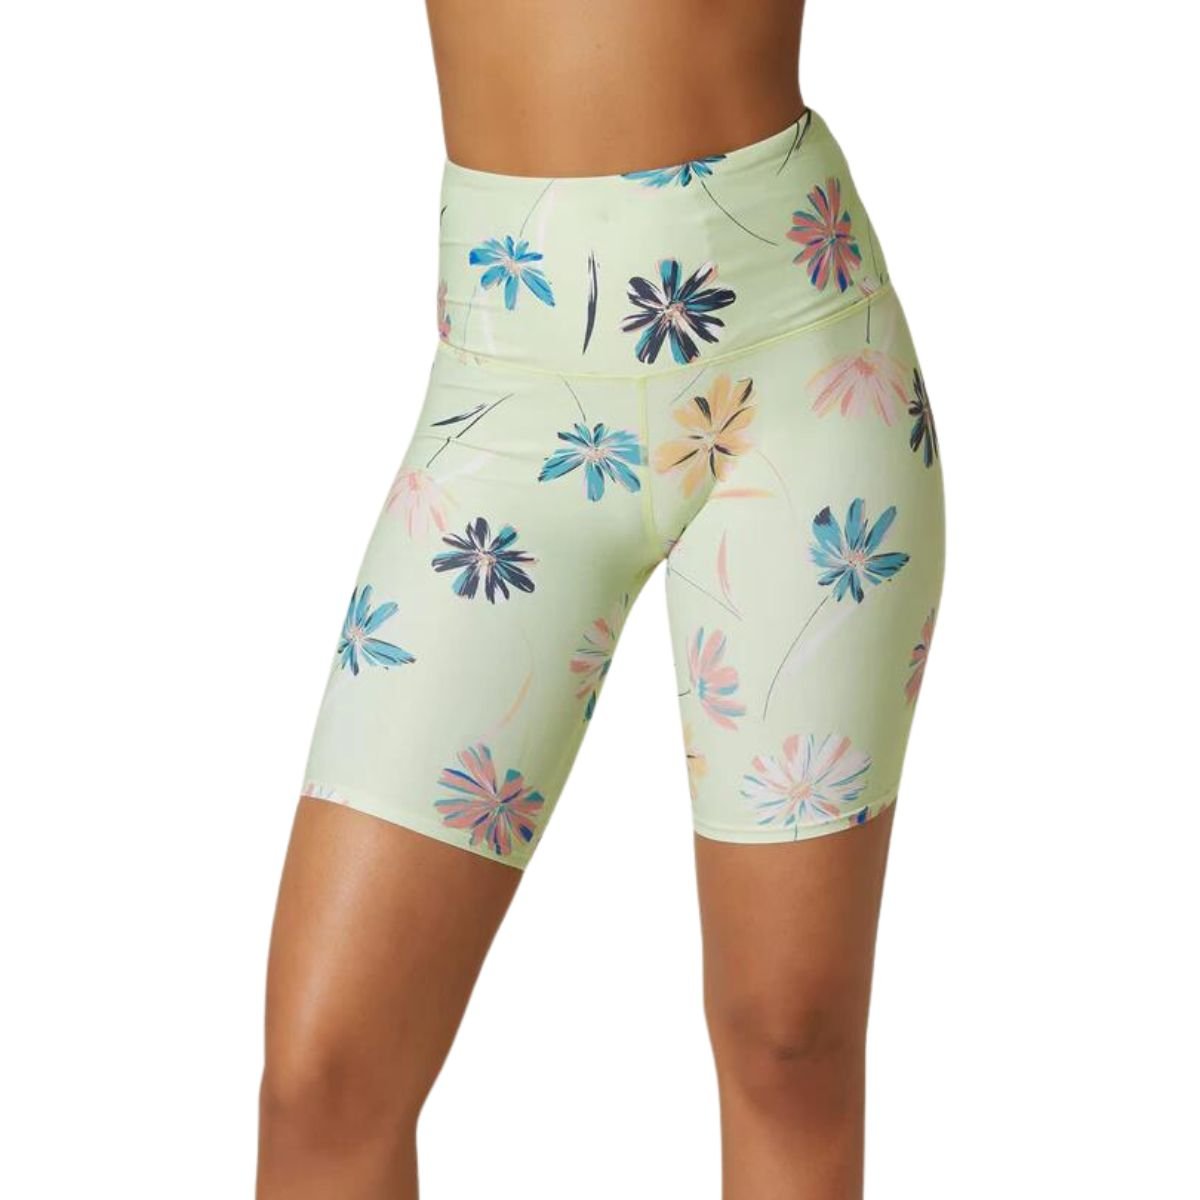 O'Neill Las Flores Brook Floral Short in Mint - BoardCo